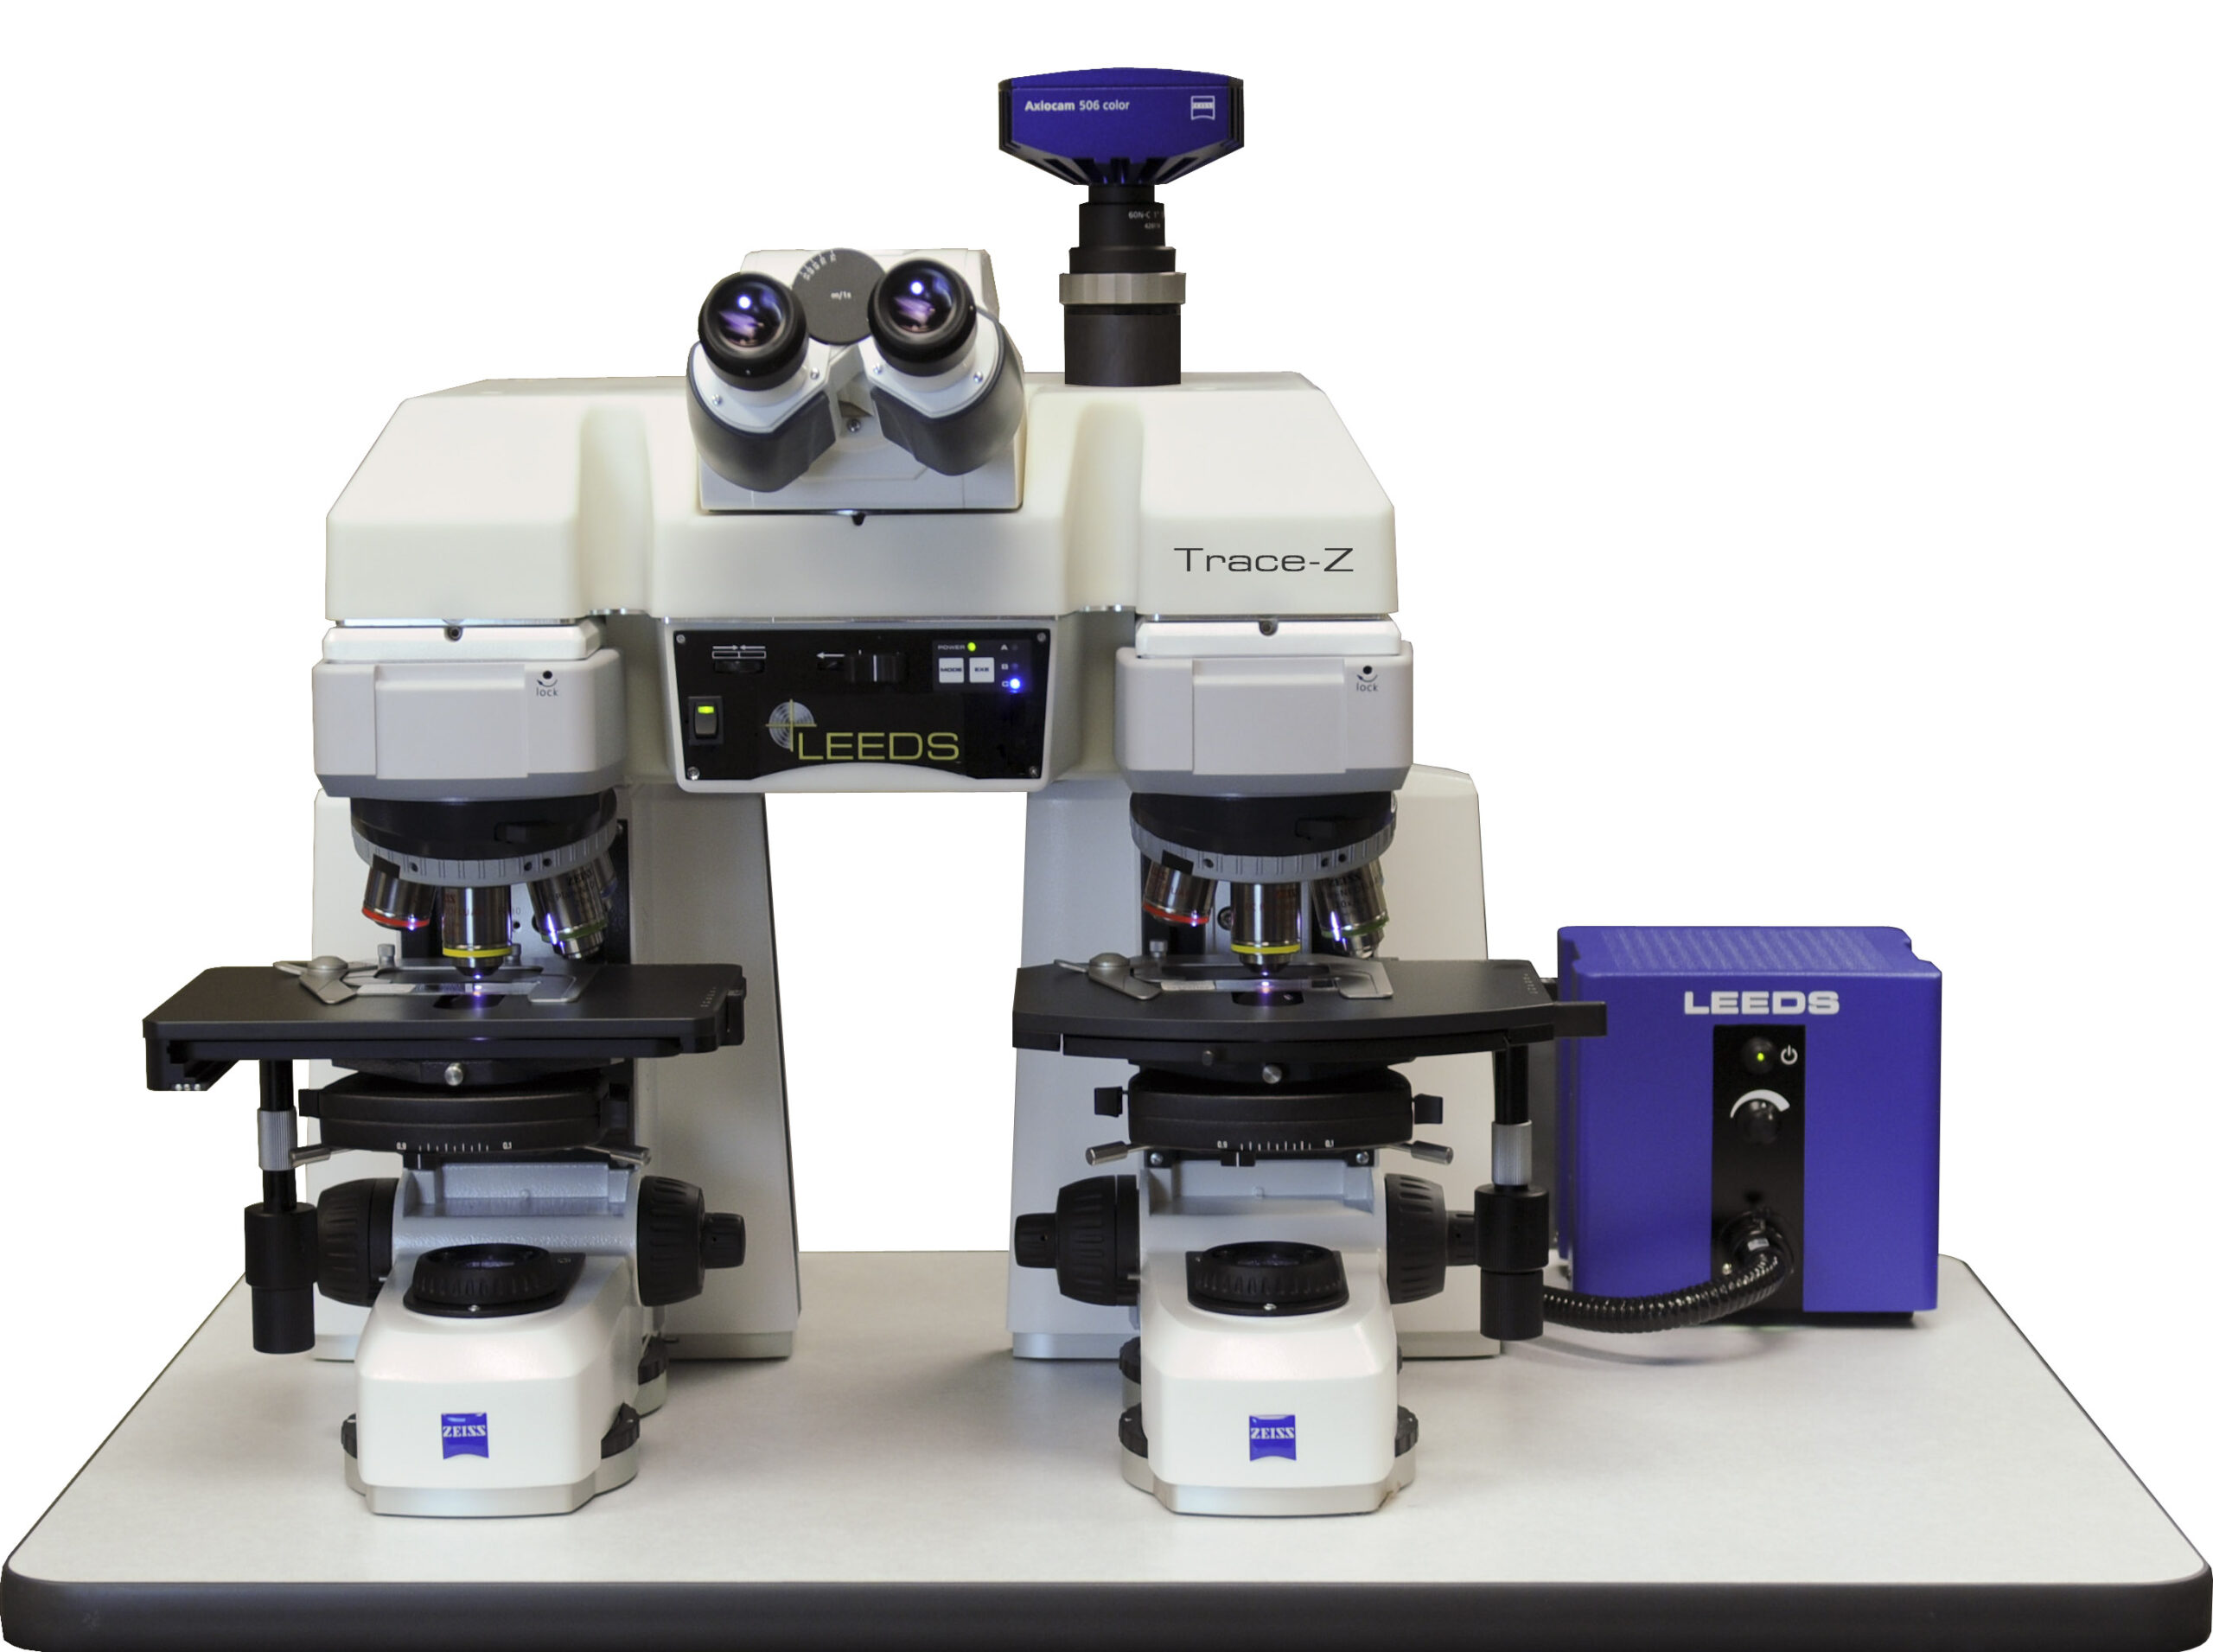 The Trace-Z Trace Evidence Comparison Microscope built with Zeiss Optics